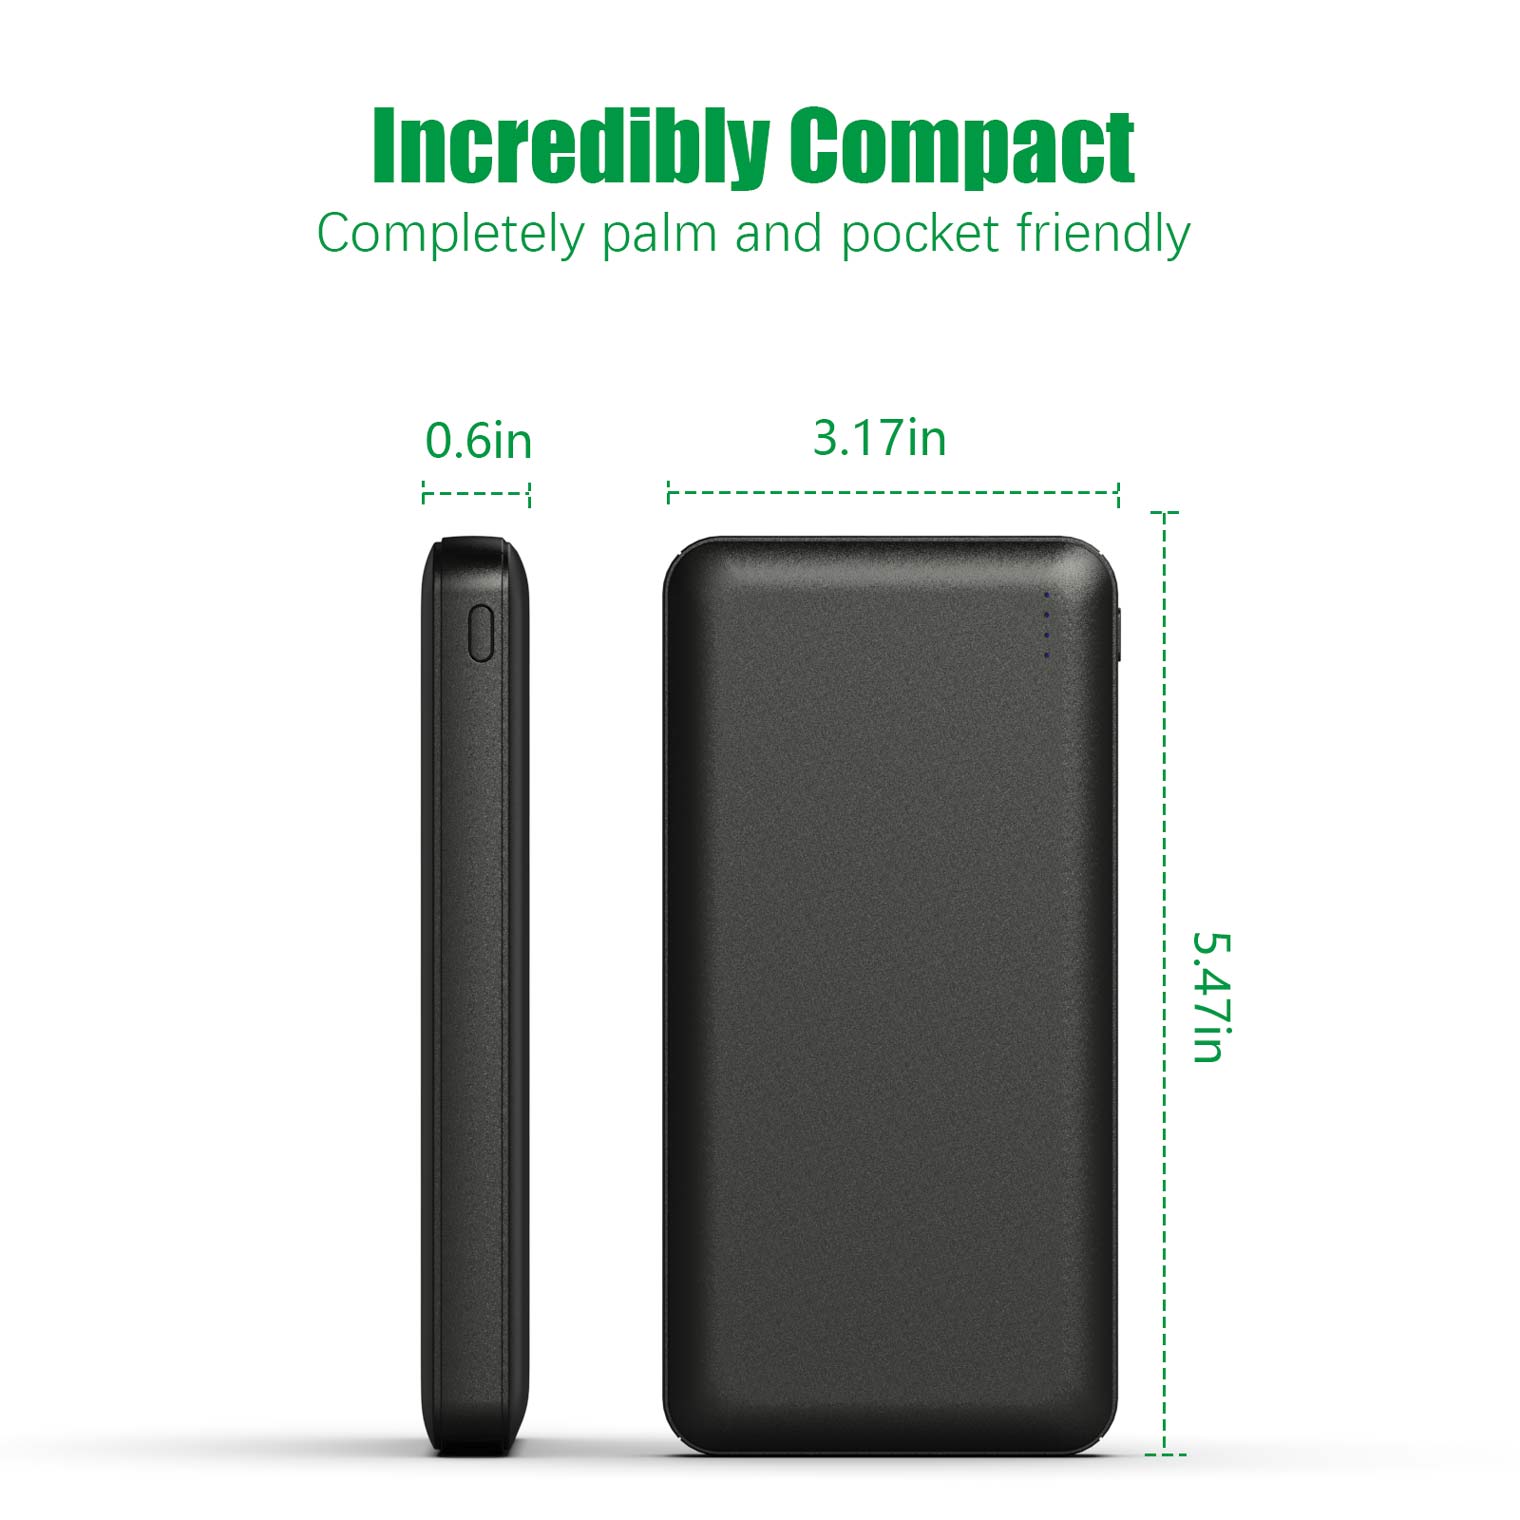 Mini Power bank portable charger 10000mAh external battery pack charger For iphone, ipad, Samsung, Huawei, Smartphones Speaker etc.